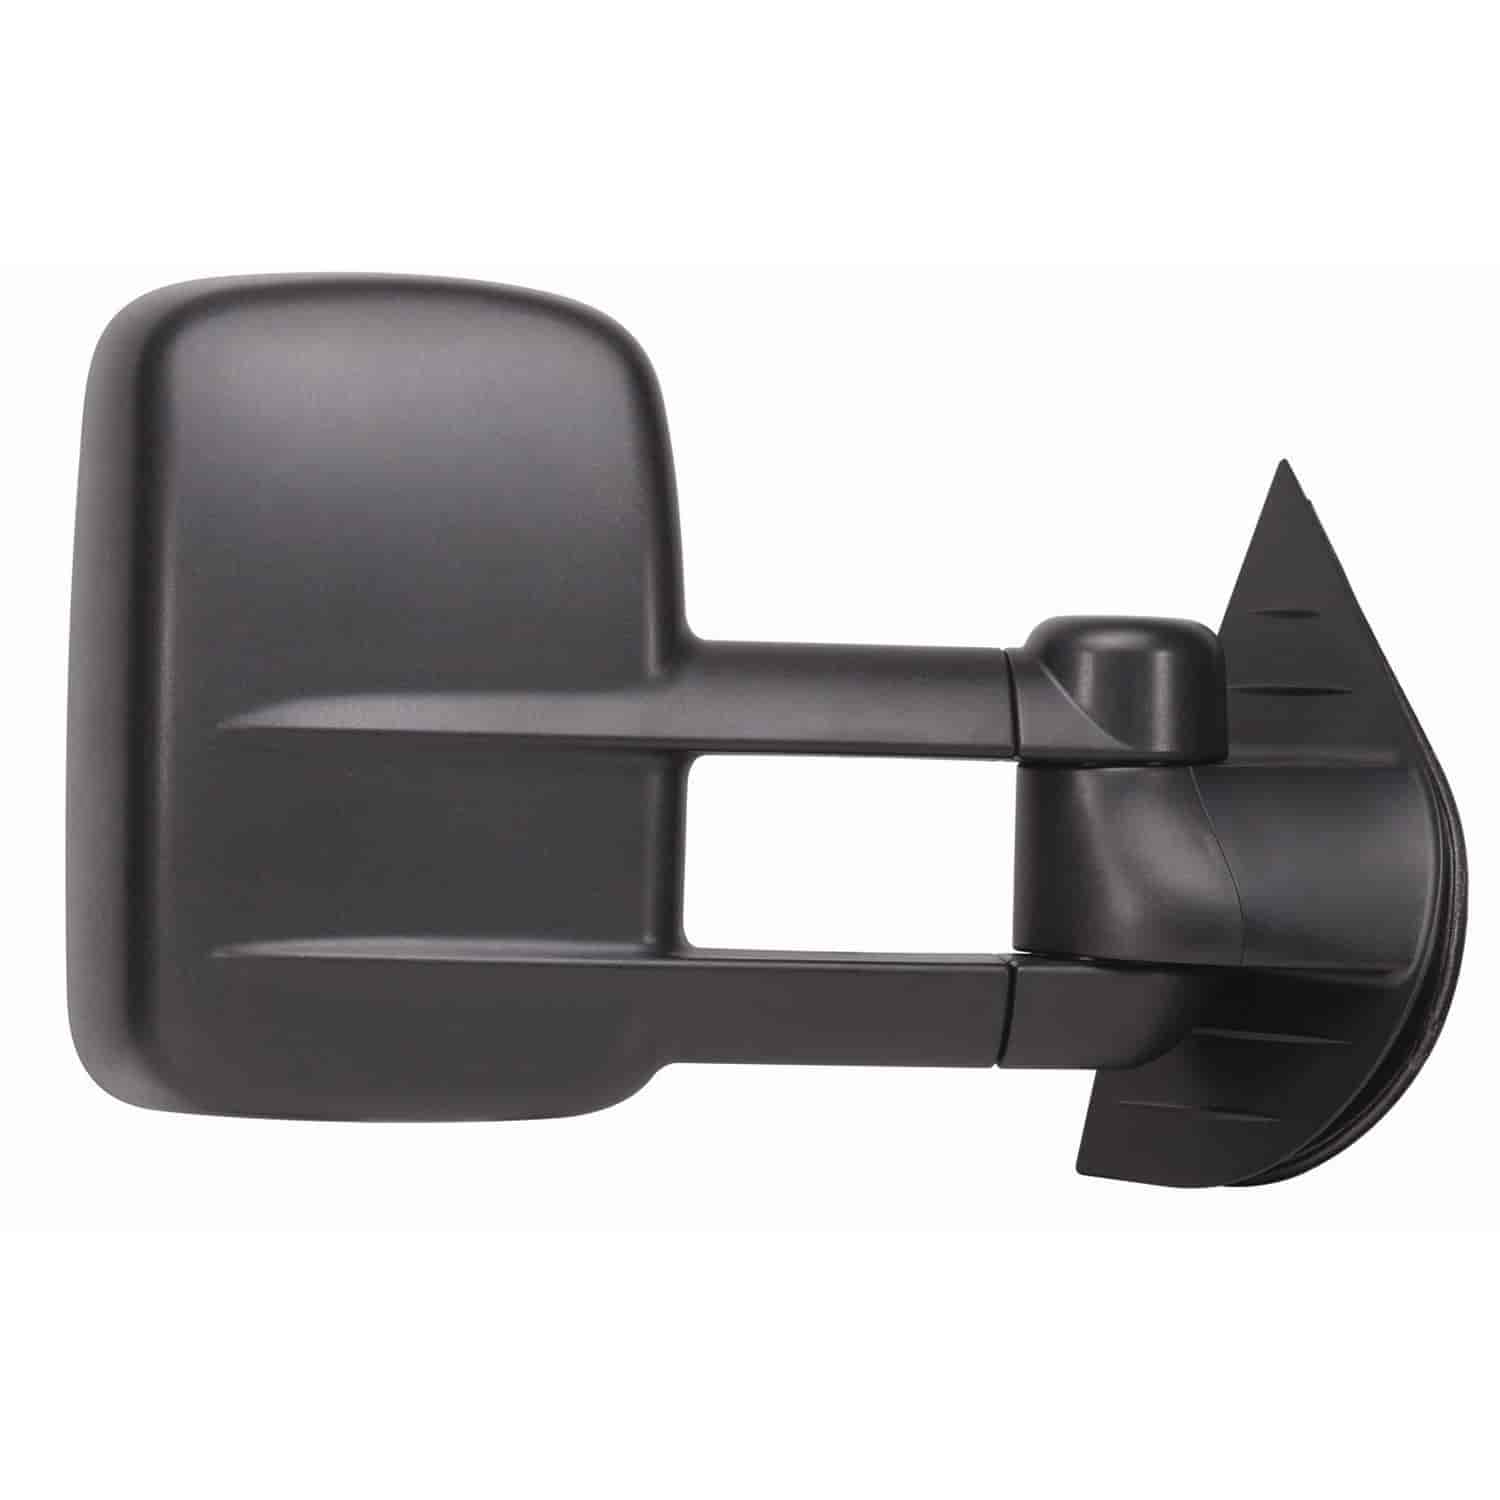 OEM Style Replacement Mirror Fits 2007 to 2014